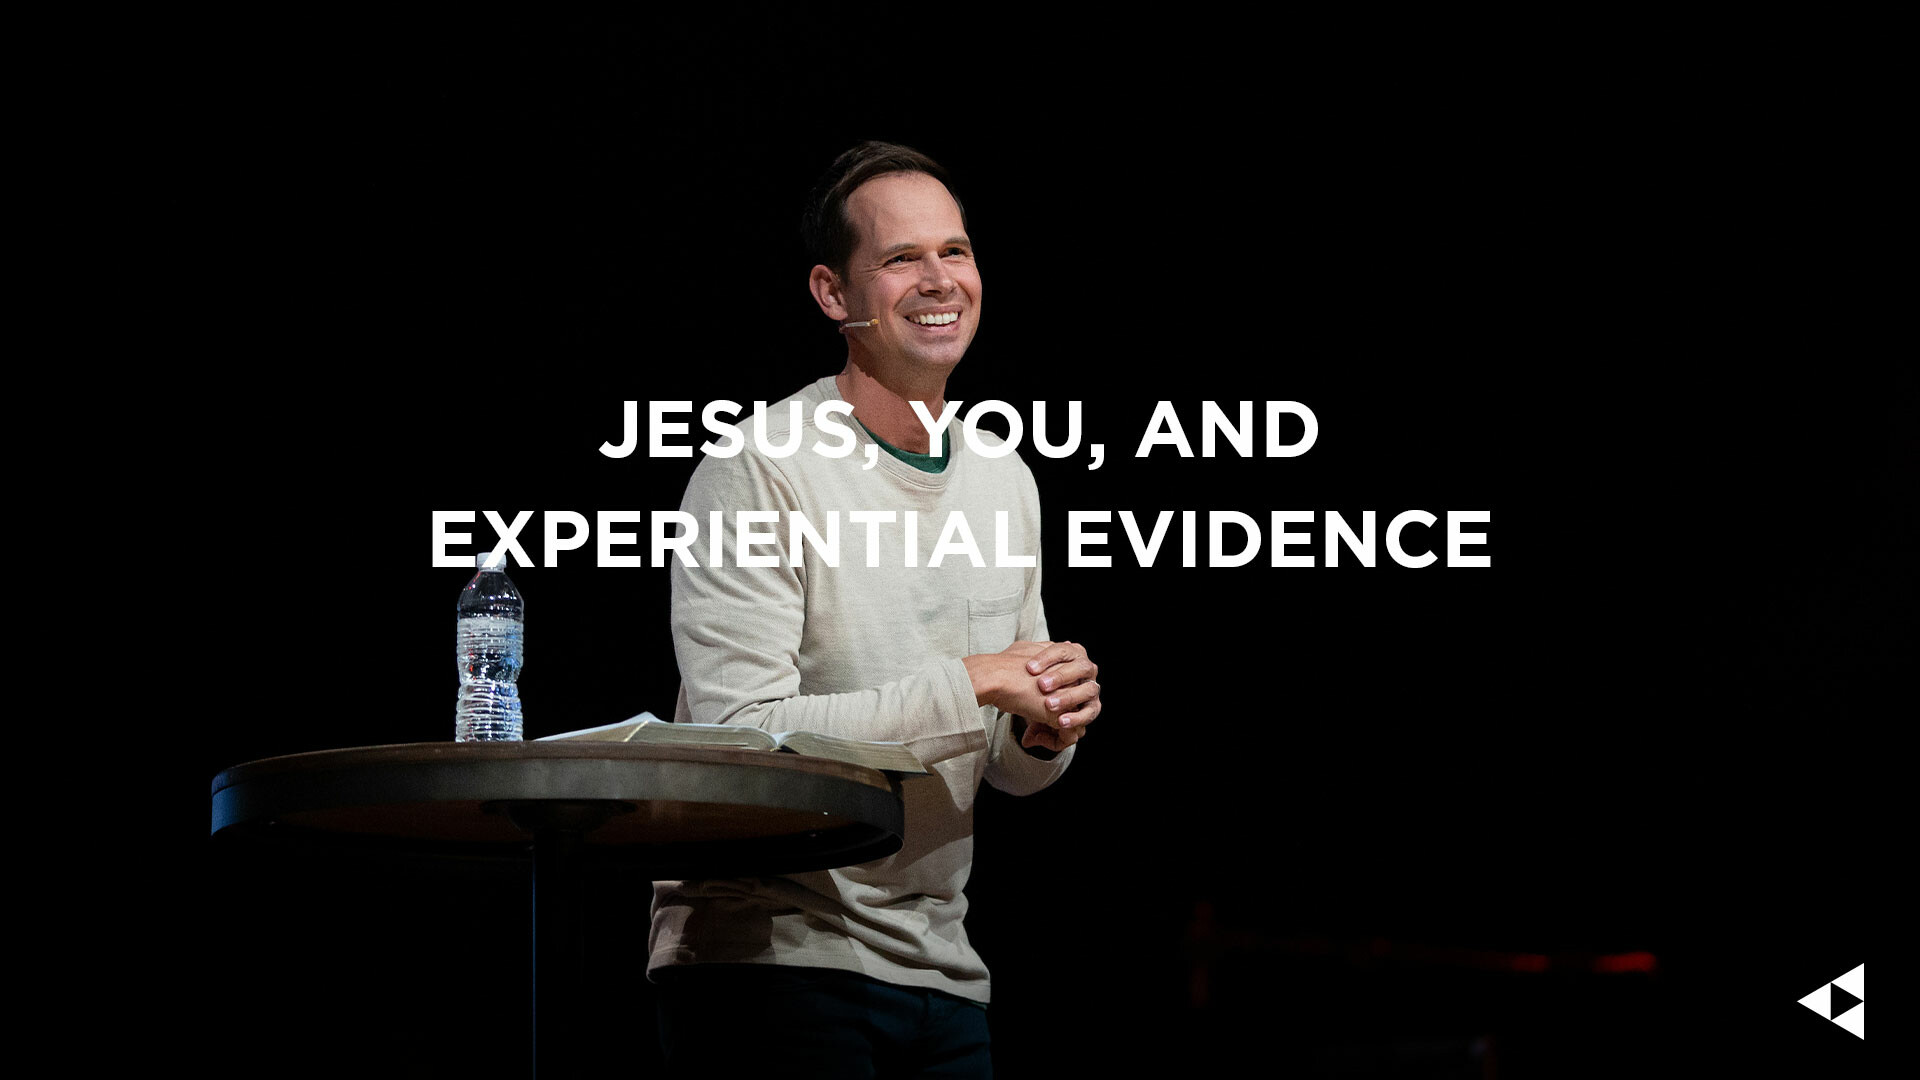 Jesus, You, and Experiential Evidence